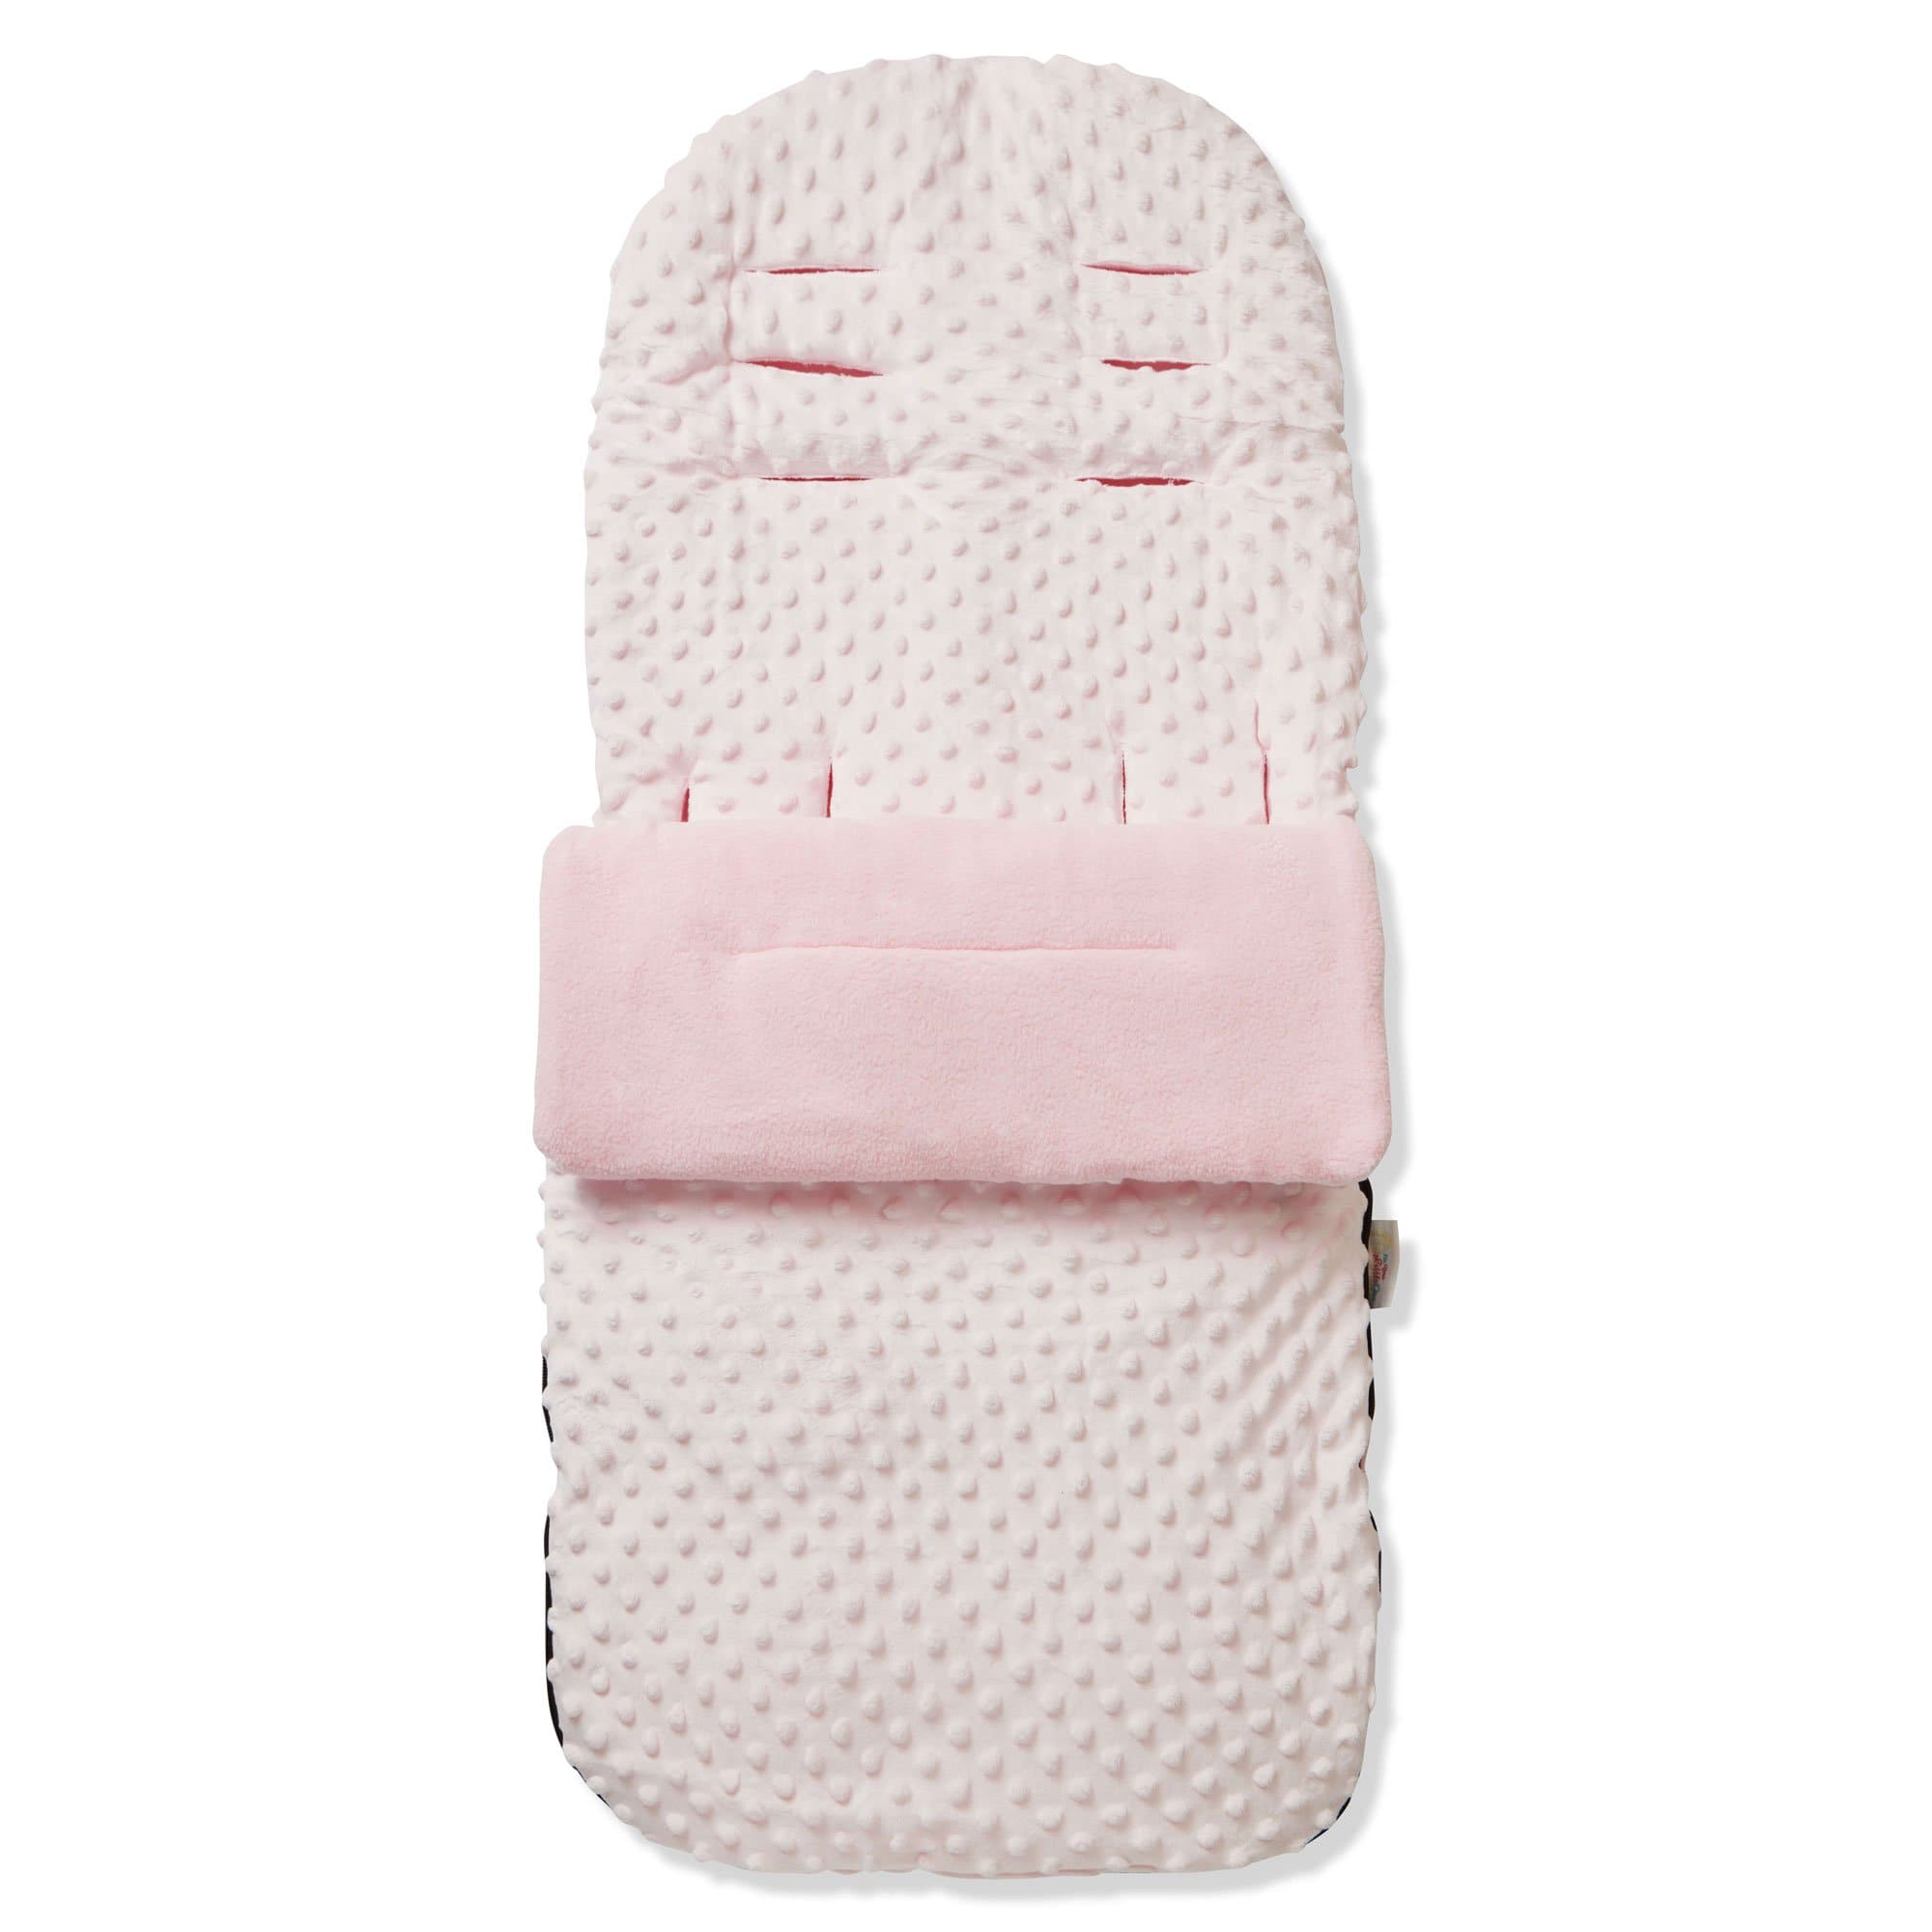 Dimple Footmuff / Cosy Toes Compatible with Baby Elegance - Pink / Fits All Models | For Your Little One